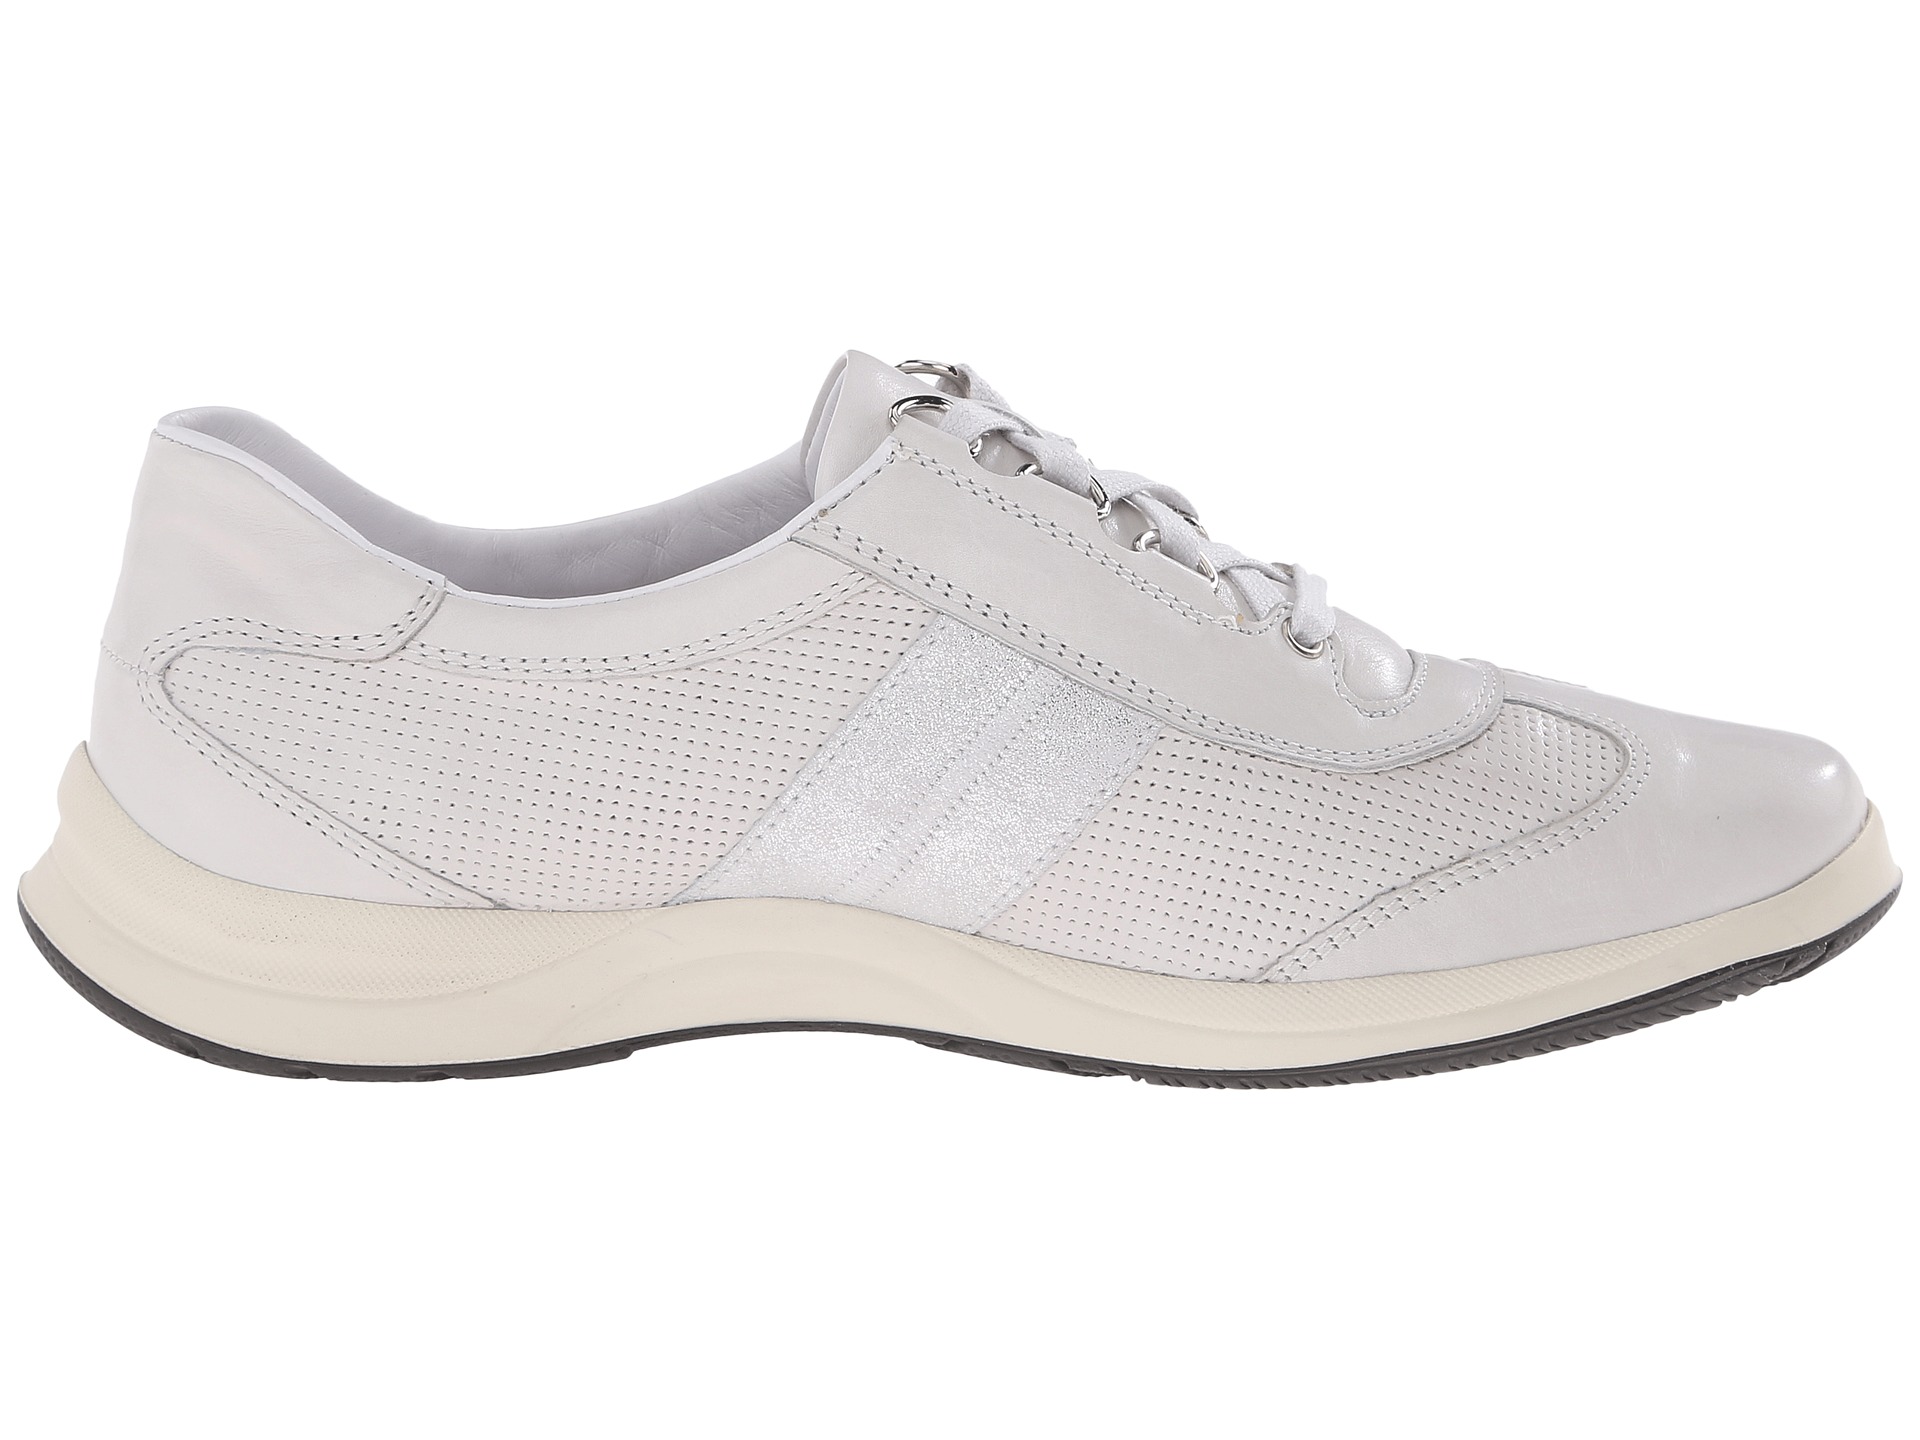 Mephisto Laser Perfore Grey Perl Calfskin - Zappos.com Free Shipping ...